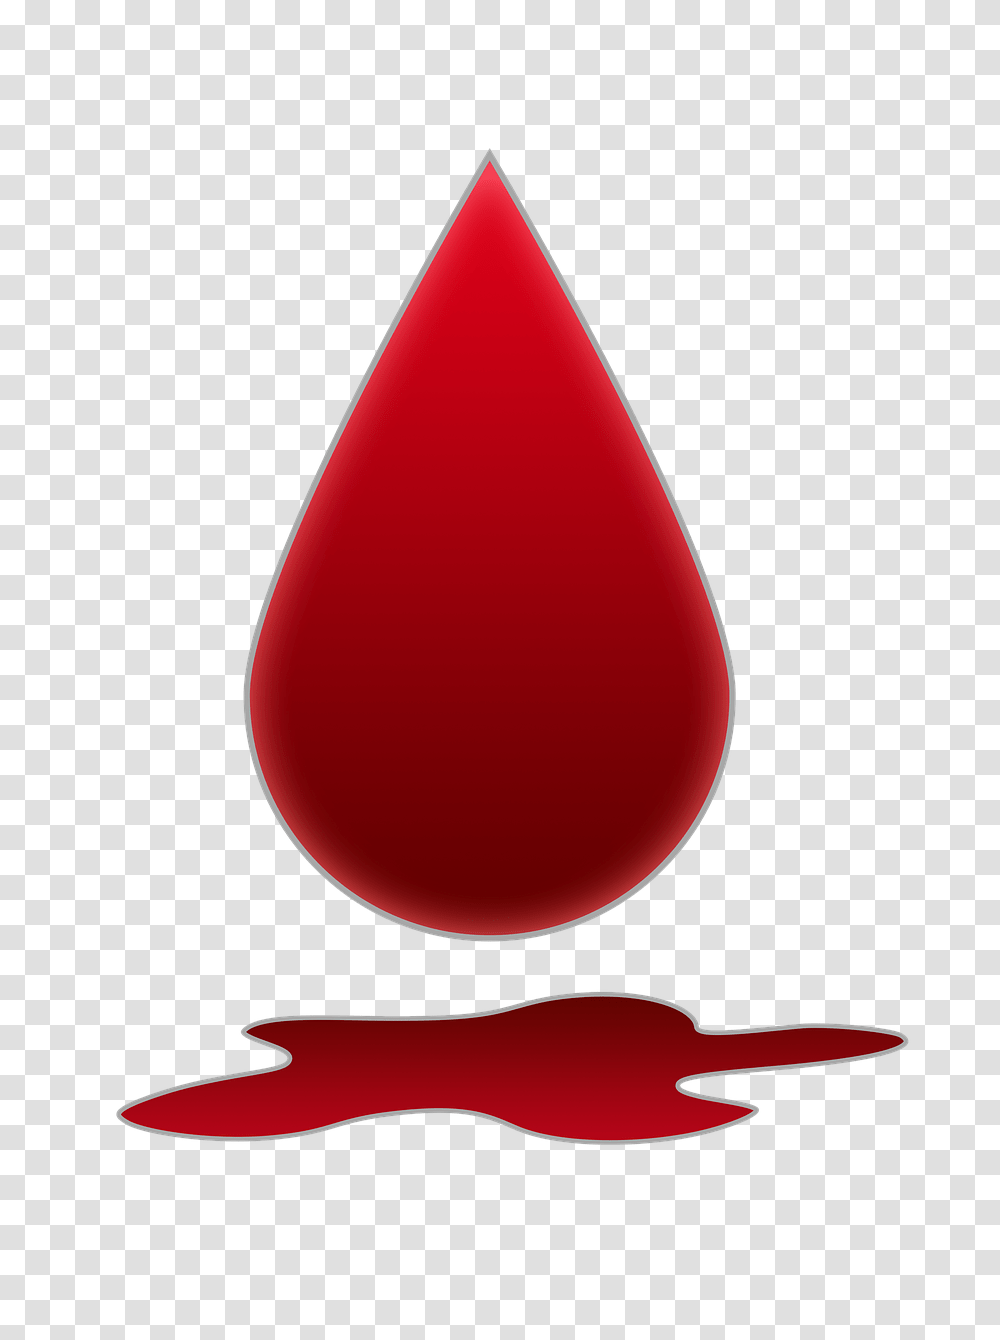 Red Blood Drop, Droplet, Plant, Cone, Tabletop Transparent Png